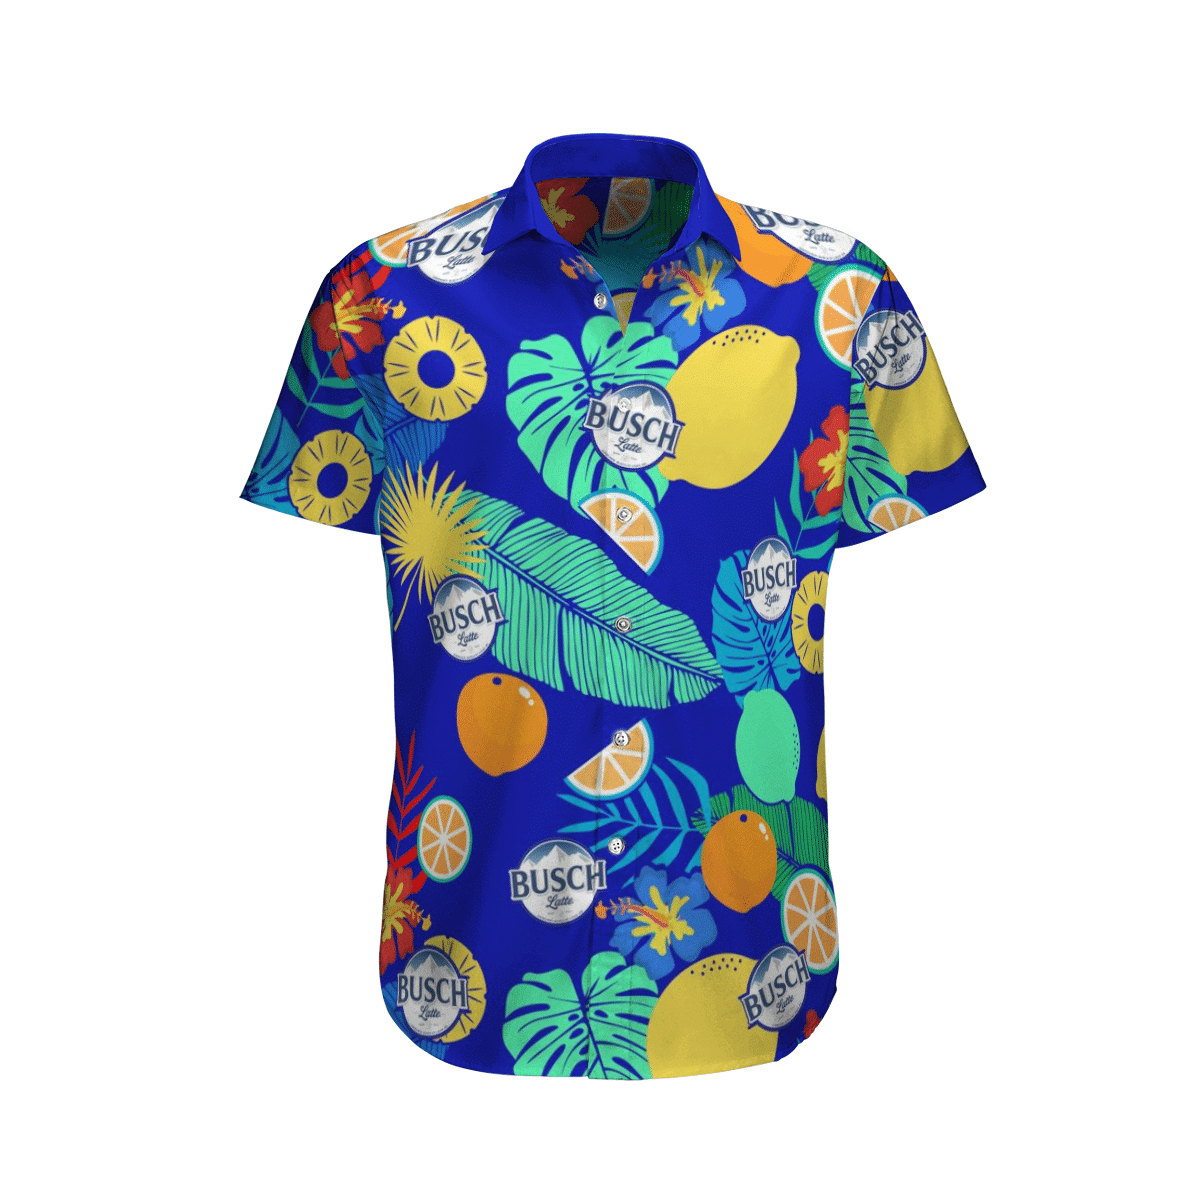 Top cool Hawaiian shirt 2022 - Make sure you get yours today before they run out! 1